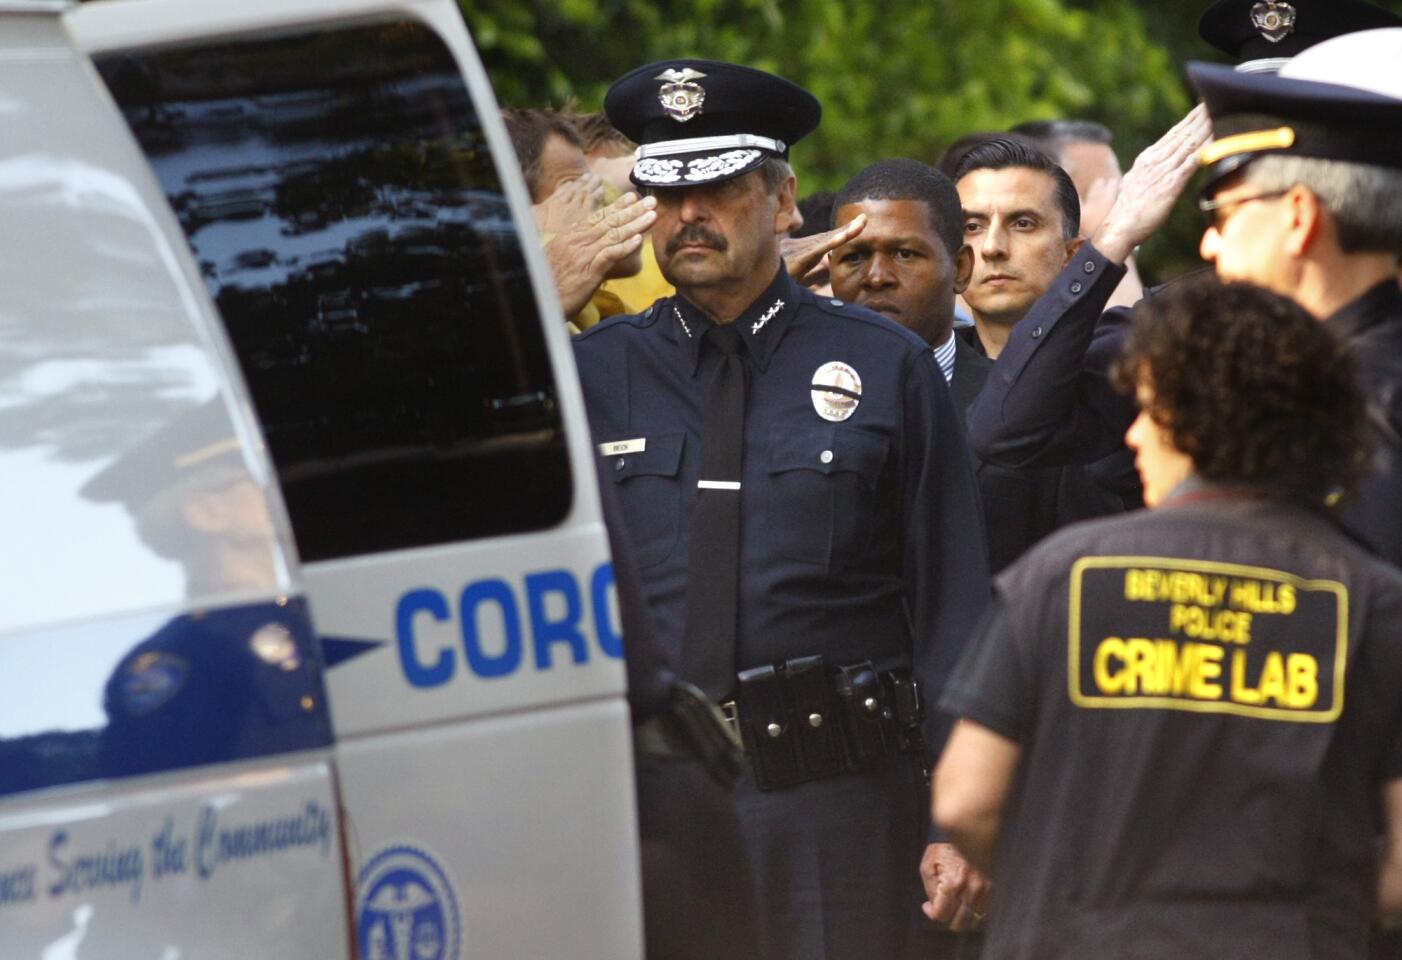 LAPD Chief Charlie Beck salutes as the body of an off-duty police officer killed in an accident with a cement truck is placed into the coroner's van